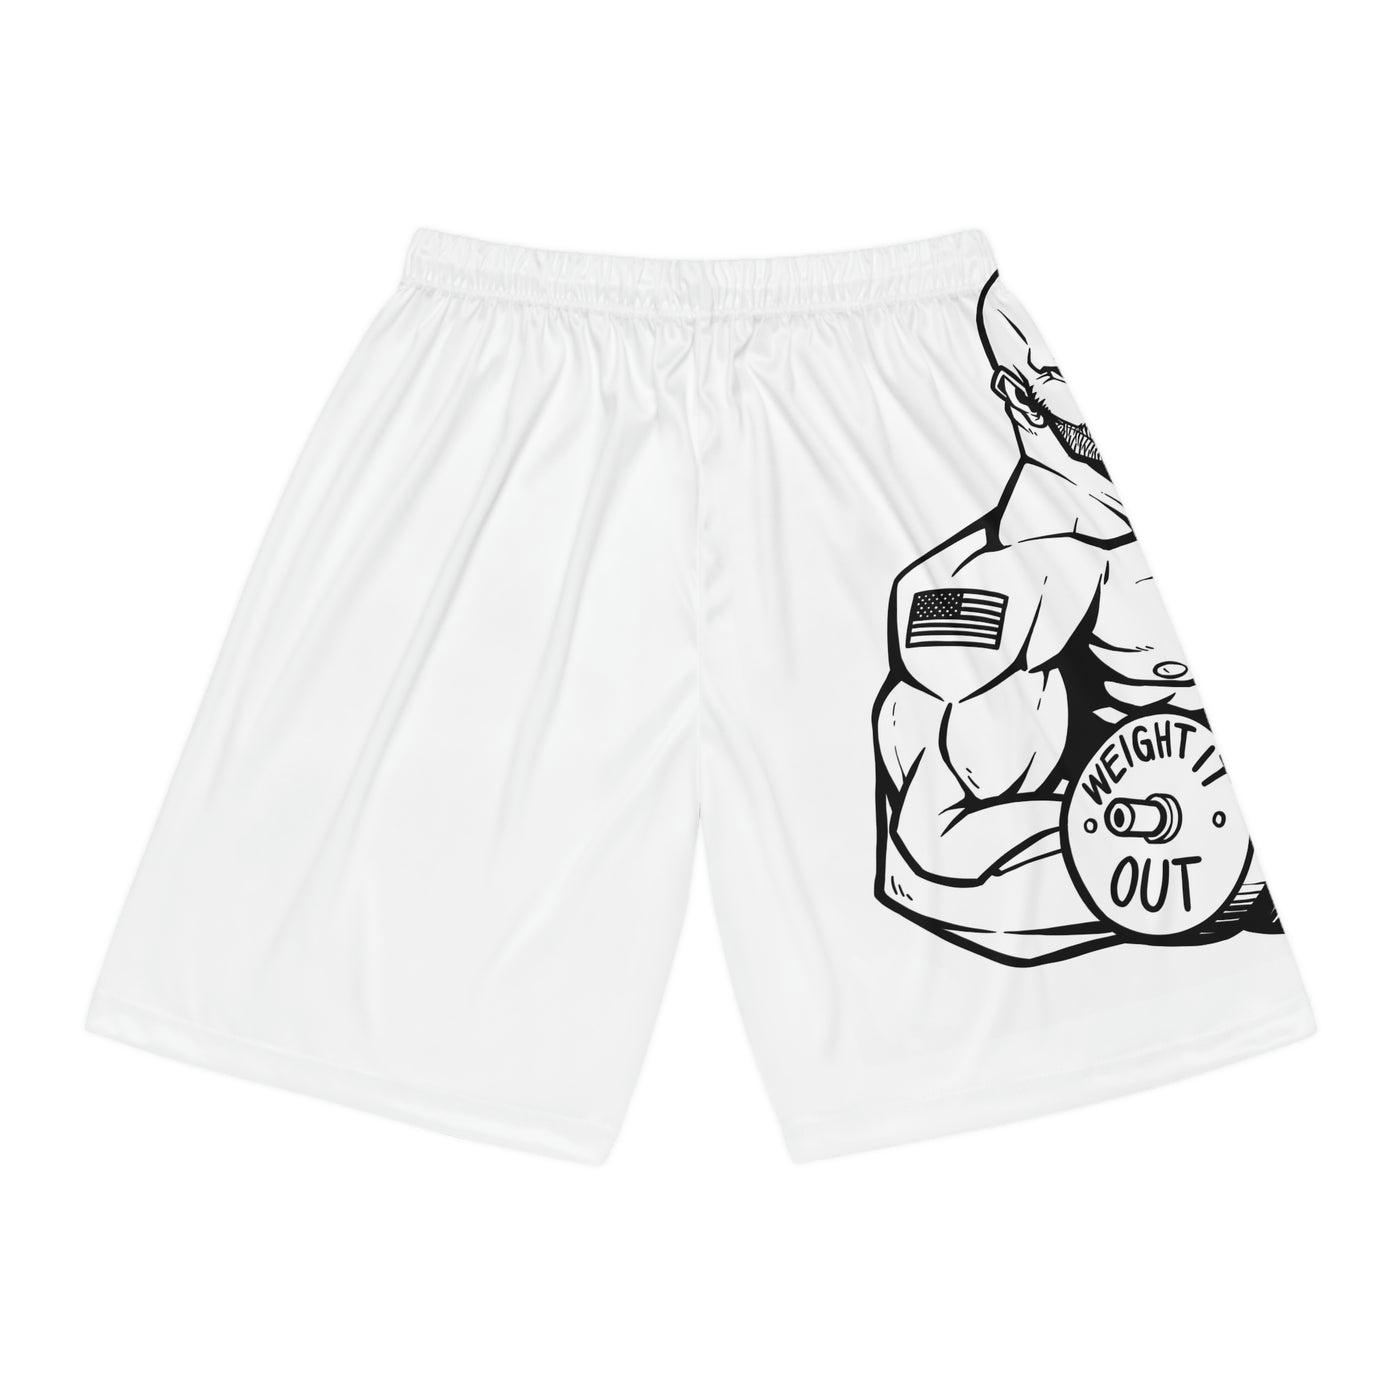 Weight It Out Shorts